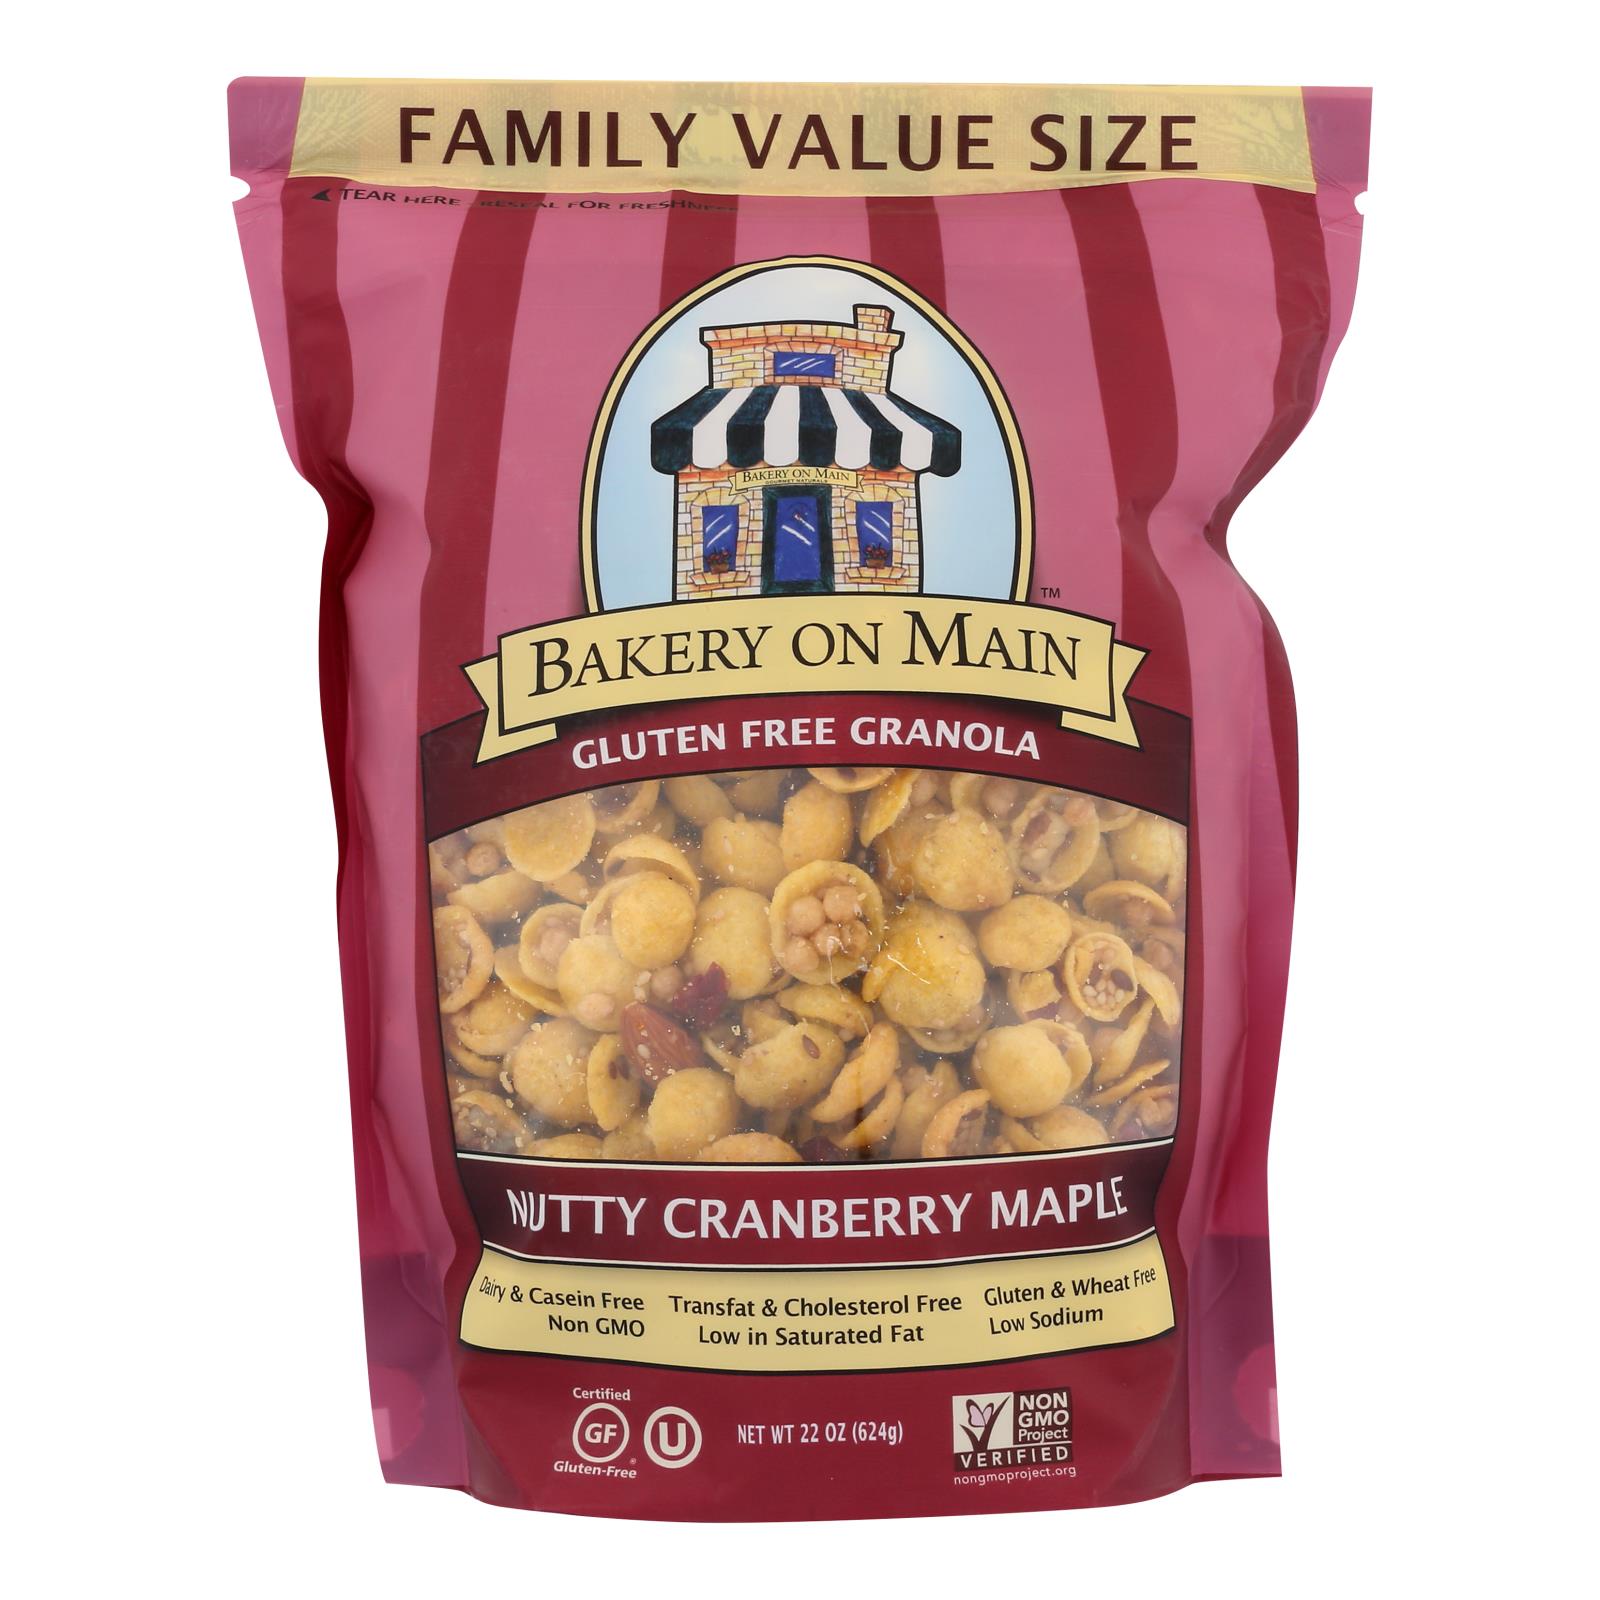 Bakery On Main, Bakery On Main  Granola - Nutty Cranberry Maple - Case of 4 - 22 oz. (Pack of 4)